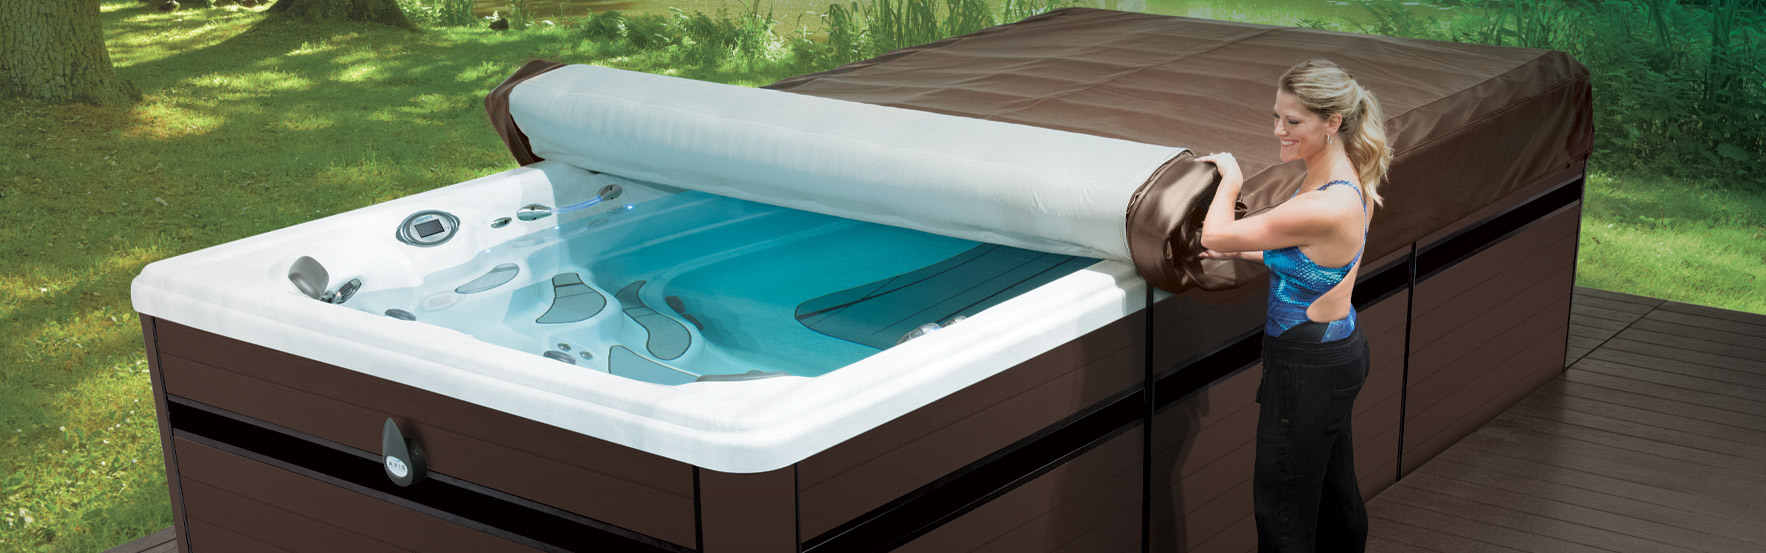 Introducing the axis cover system by master spas